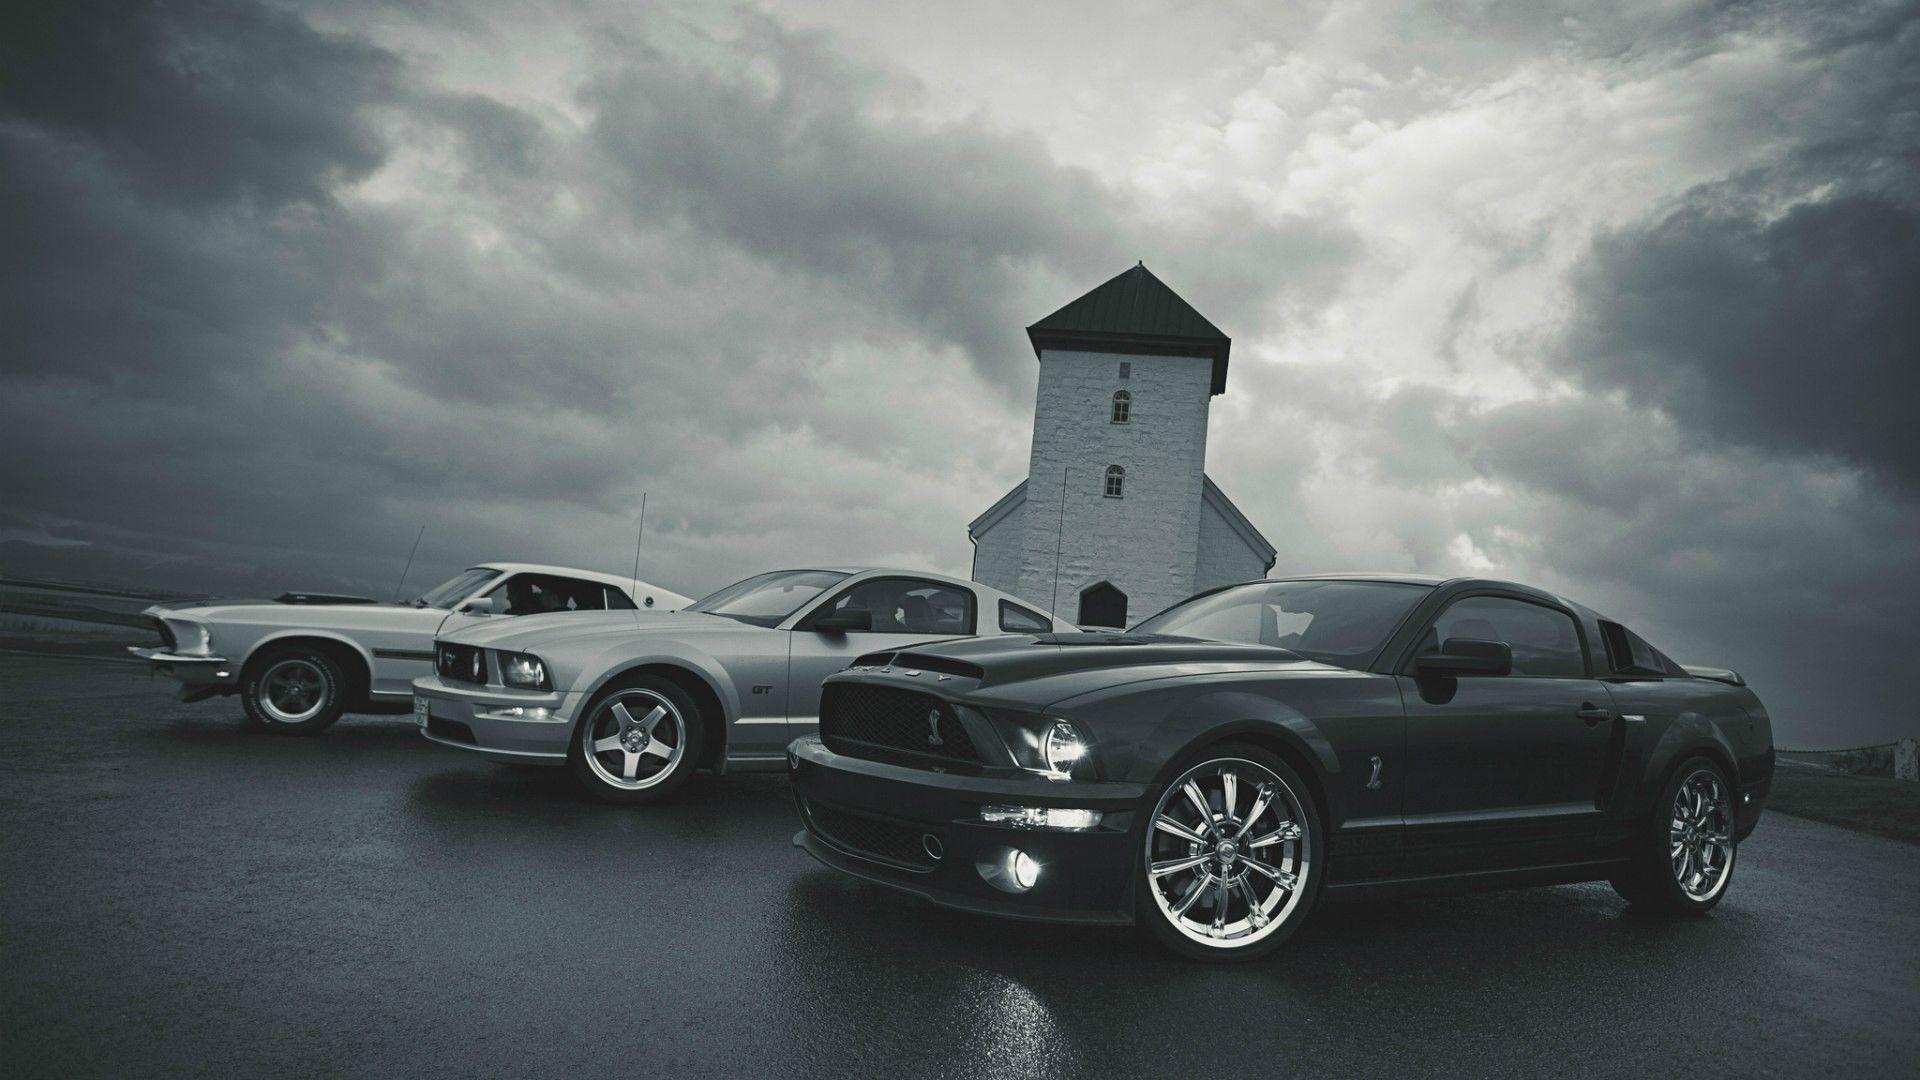 Ford Mustang Full HD Wallpaper and Background Imagex1080